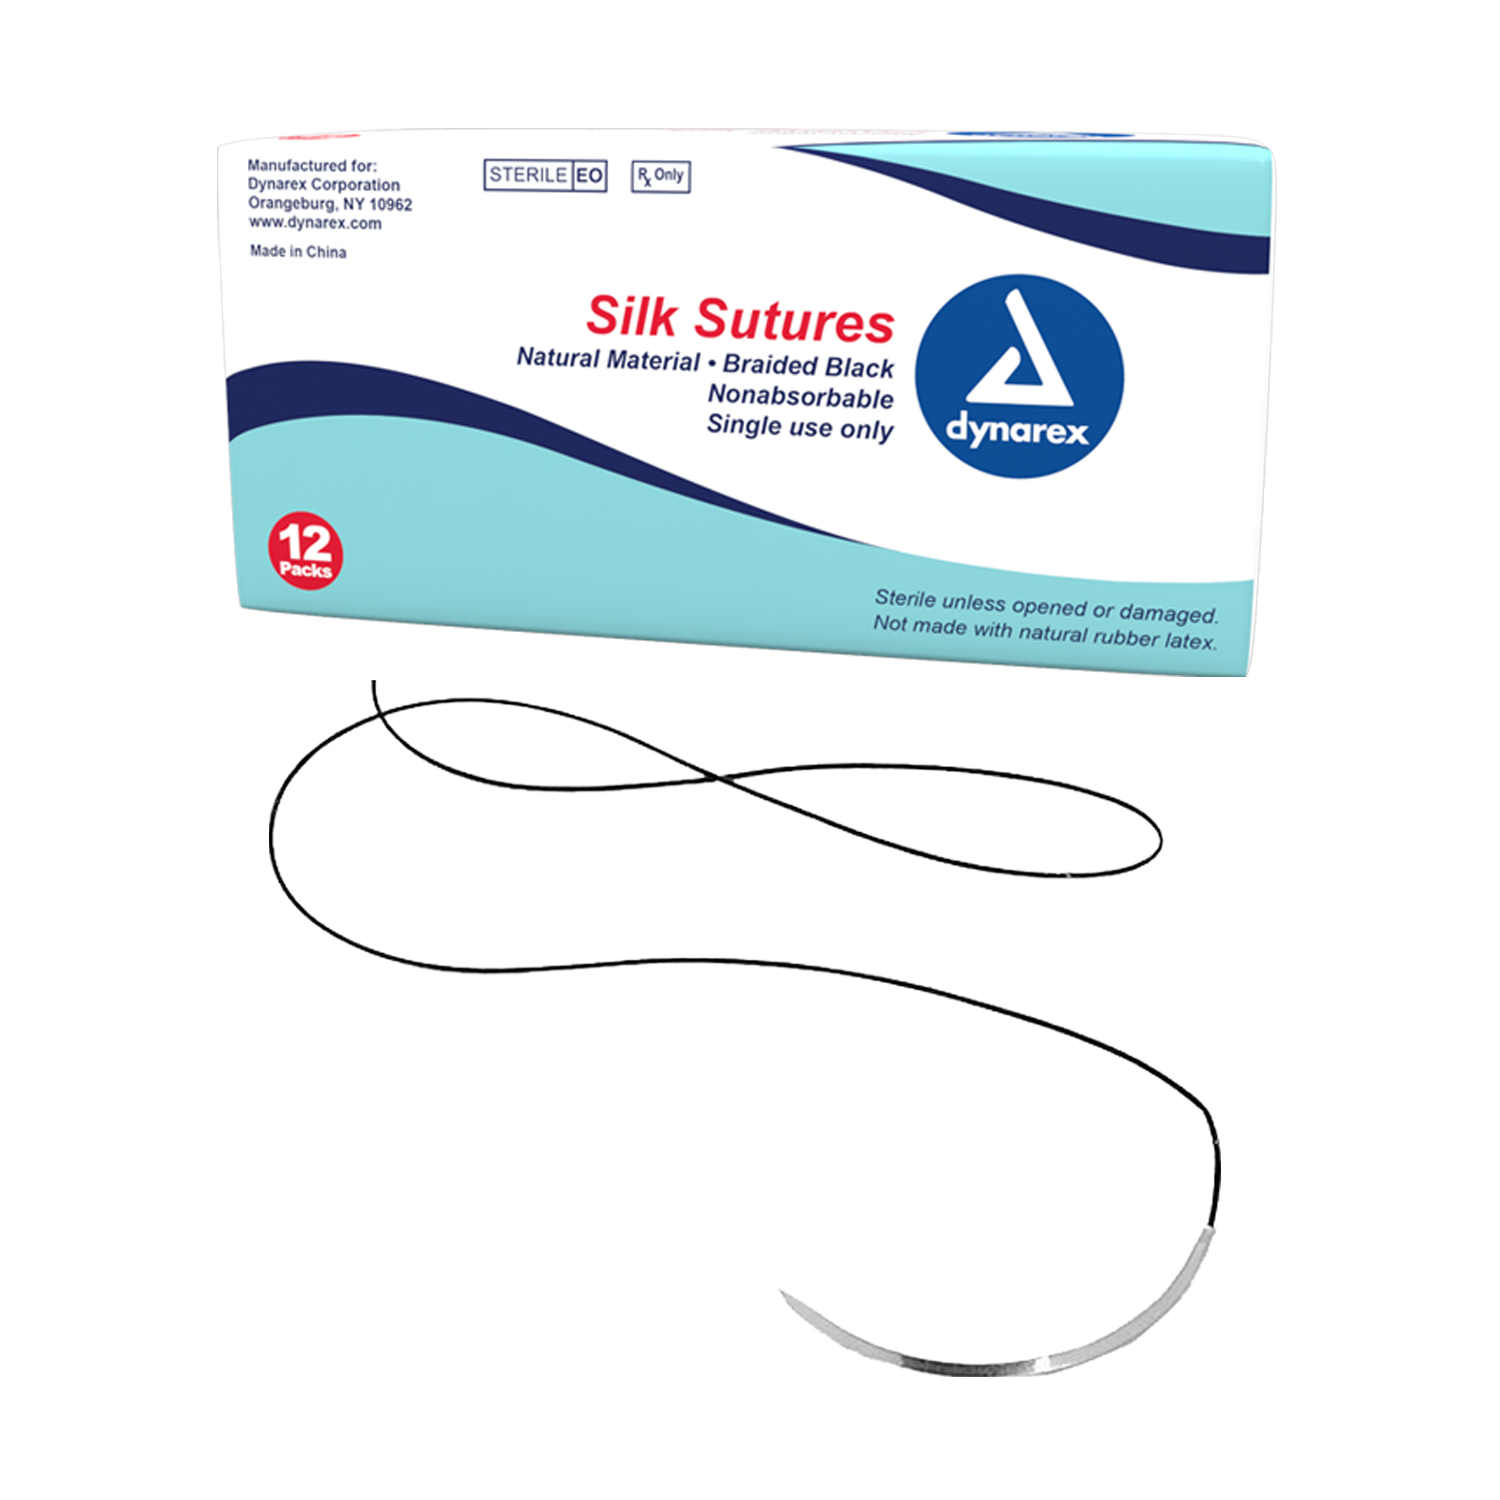 Braided Black Silk Sutures-Non Absorbable Black, 4-0, C6 Needle, 18